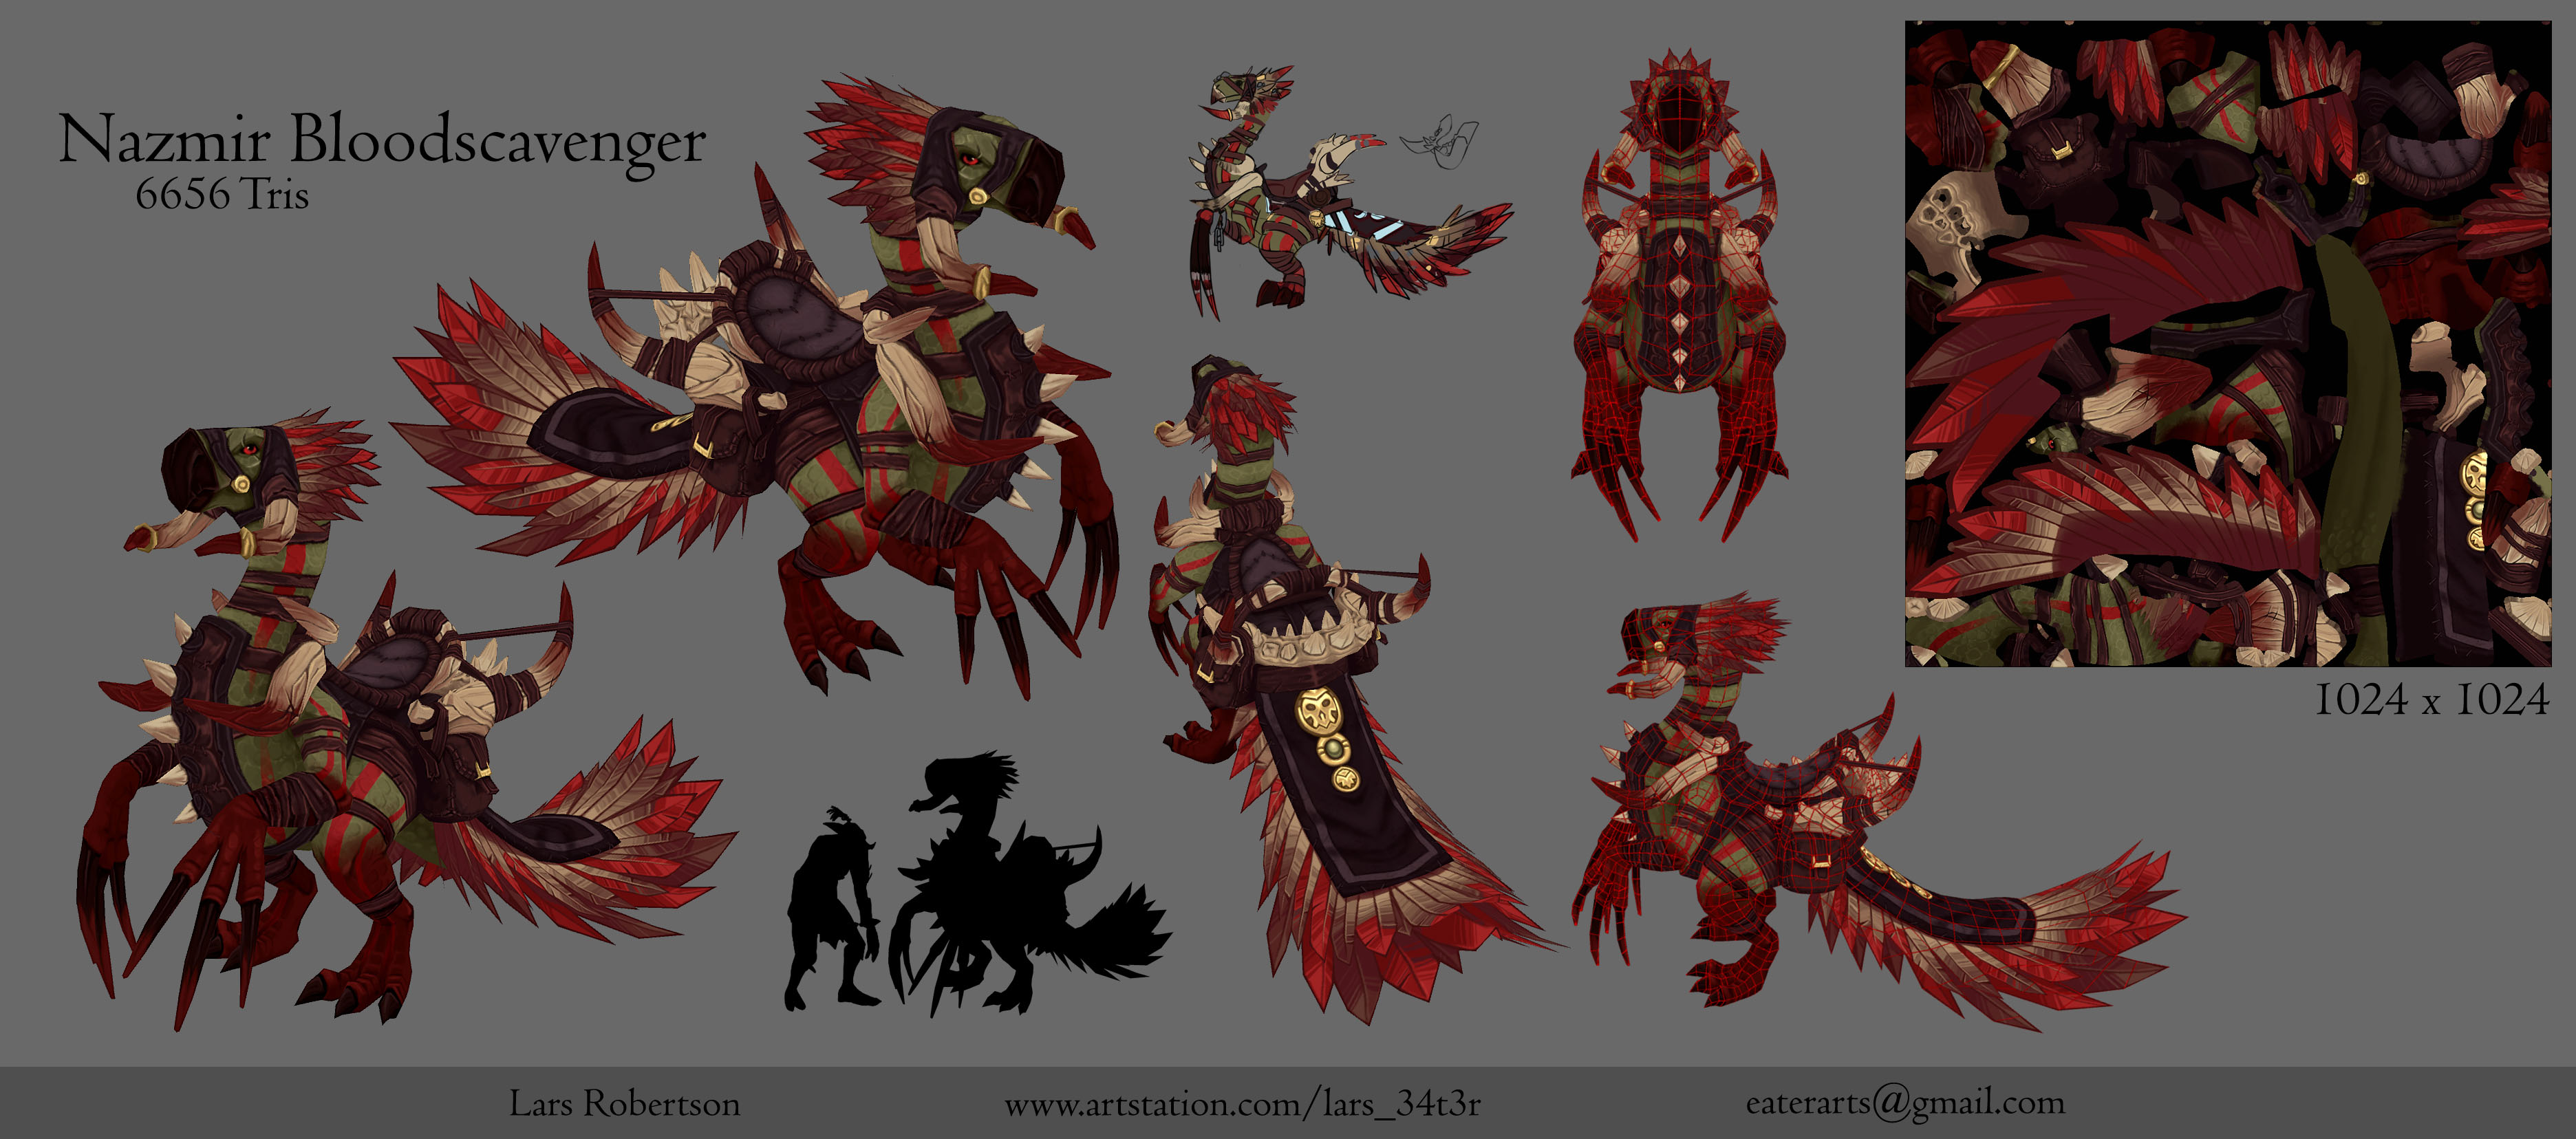 Bird-Like Mount with Reds Plumes and Green Skin